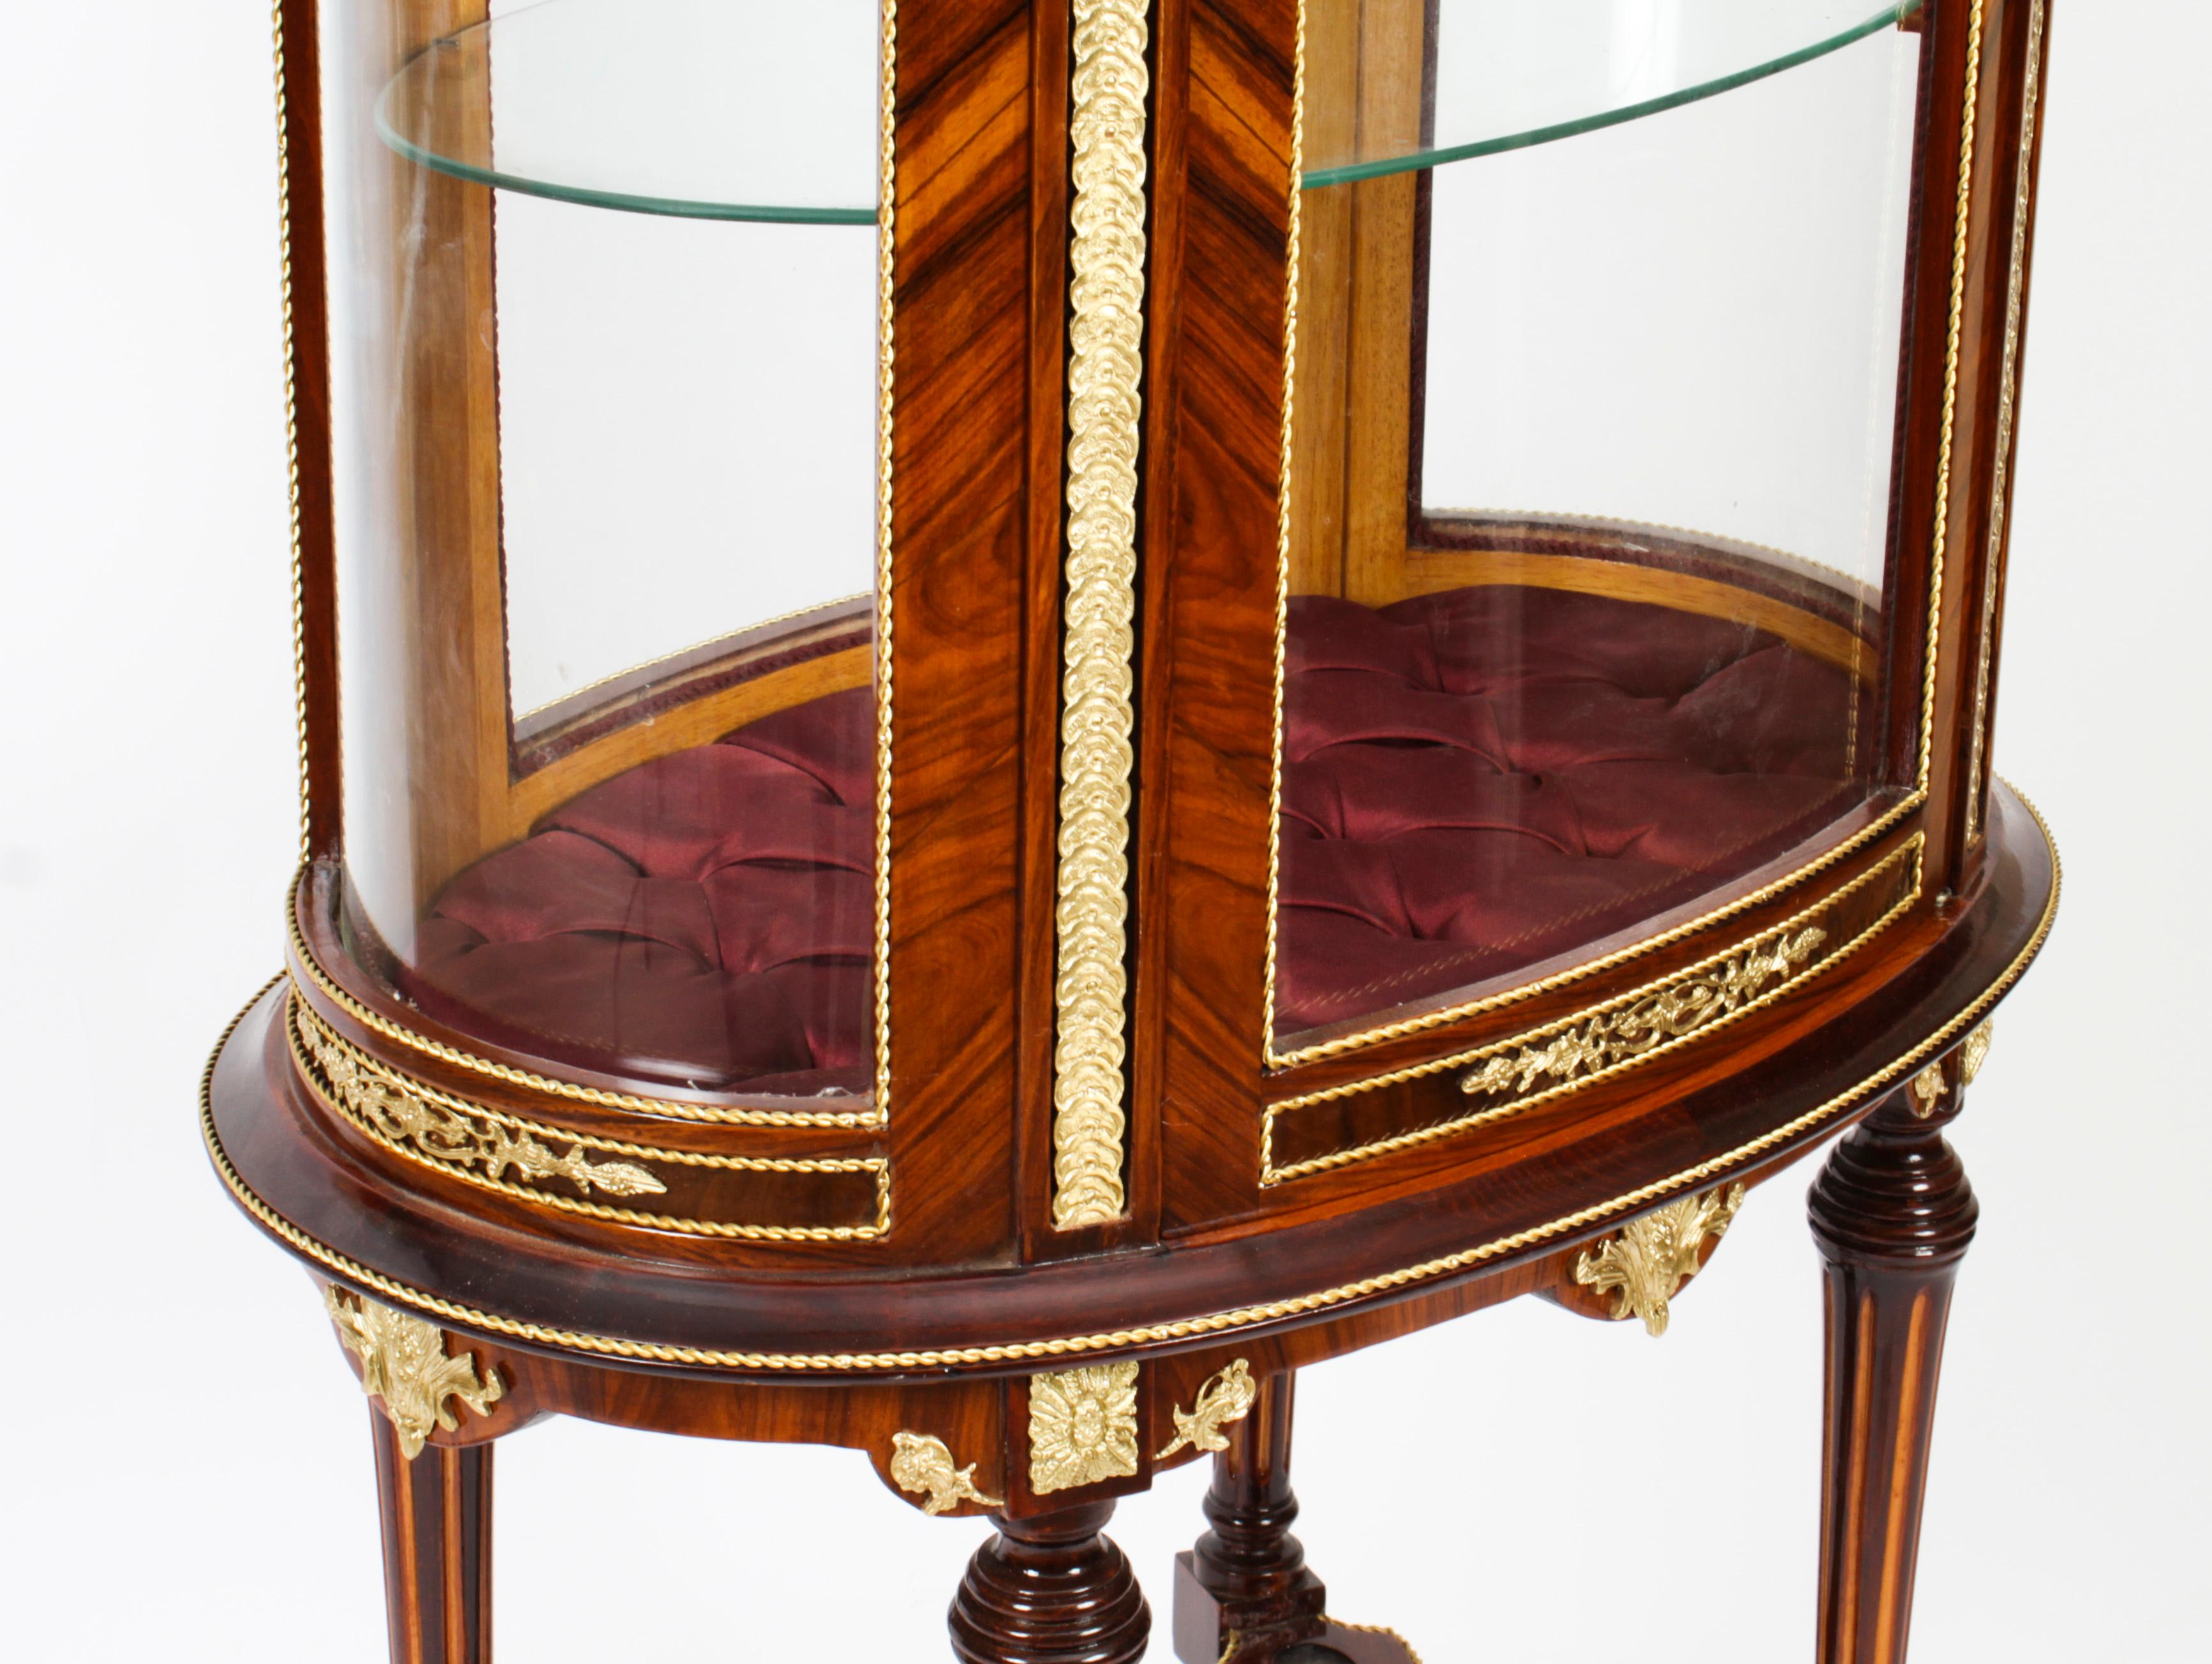 Vintage Oval Walnut & Ormolu Mounted Marble Topped Display Cabinet 20th Century For Sale 4